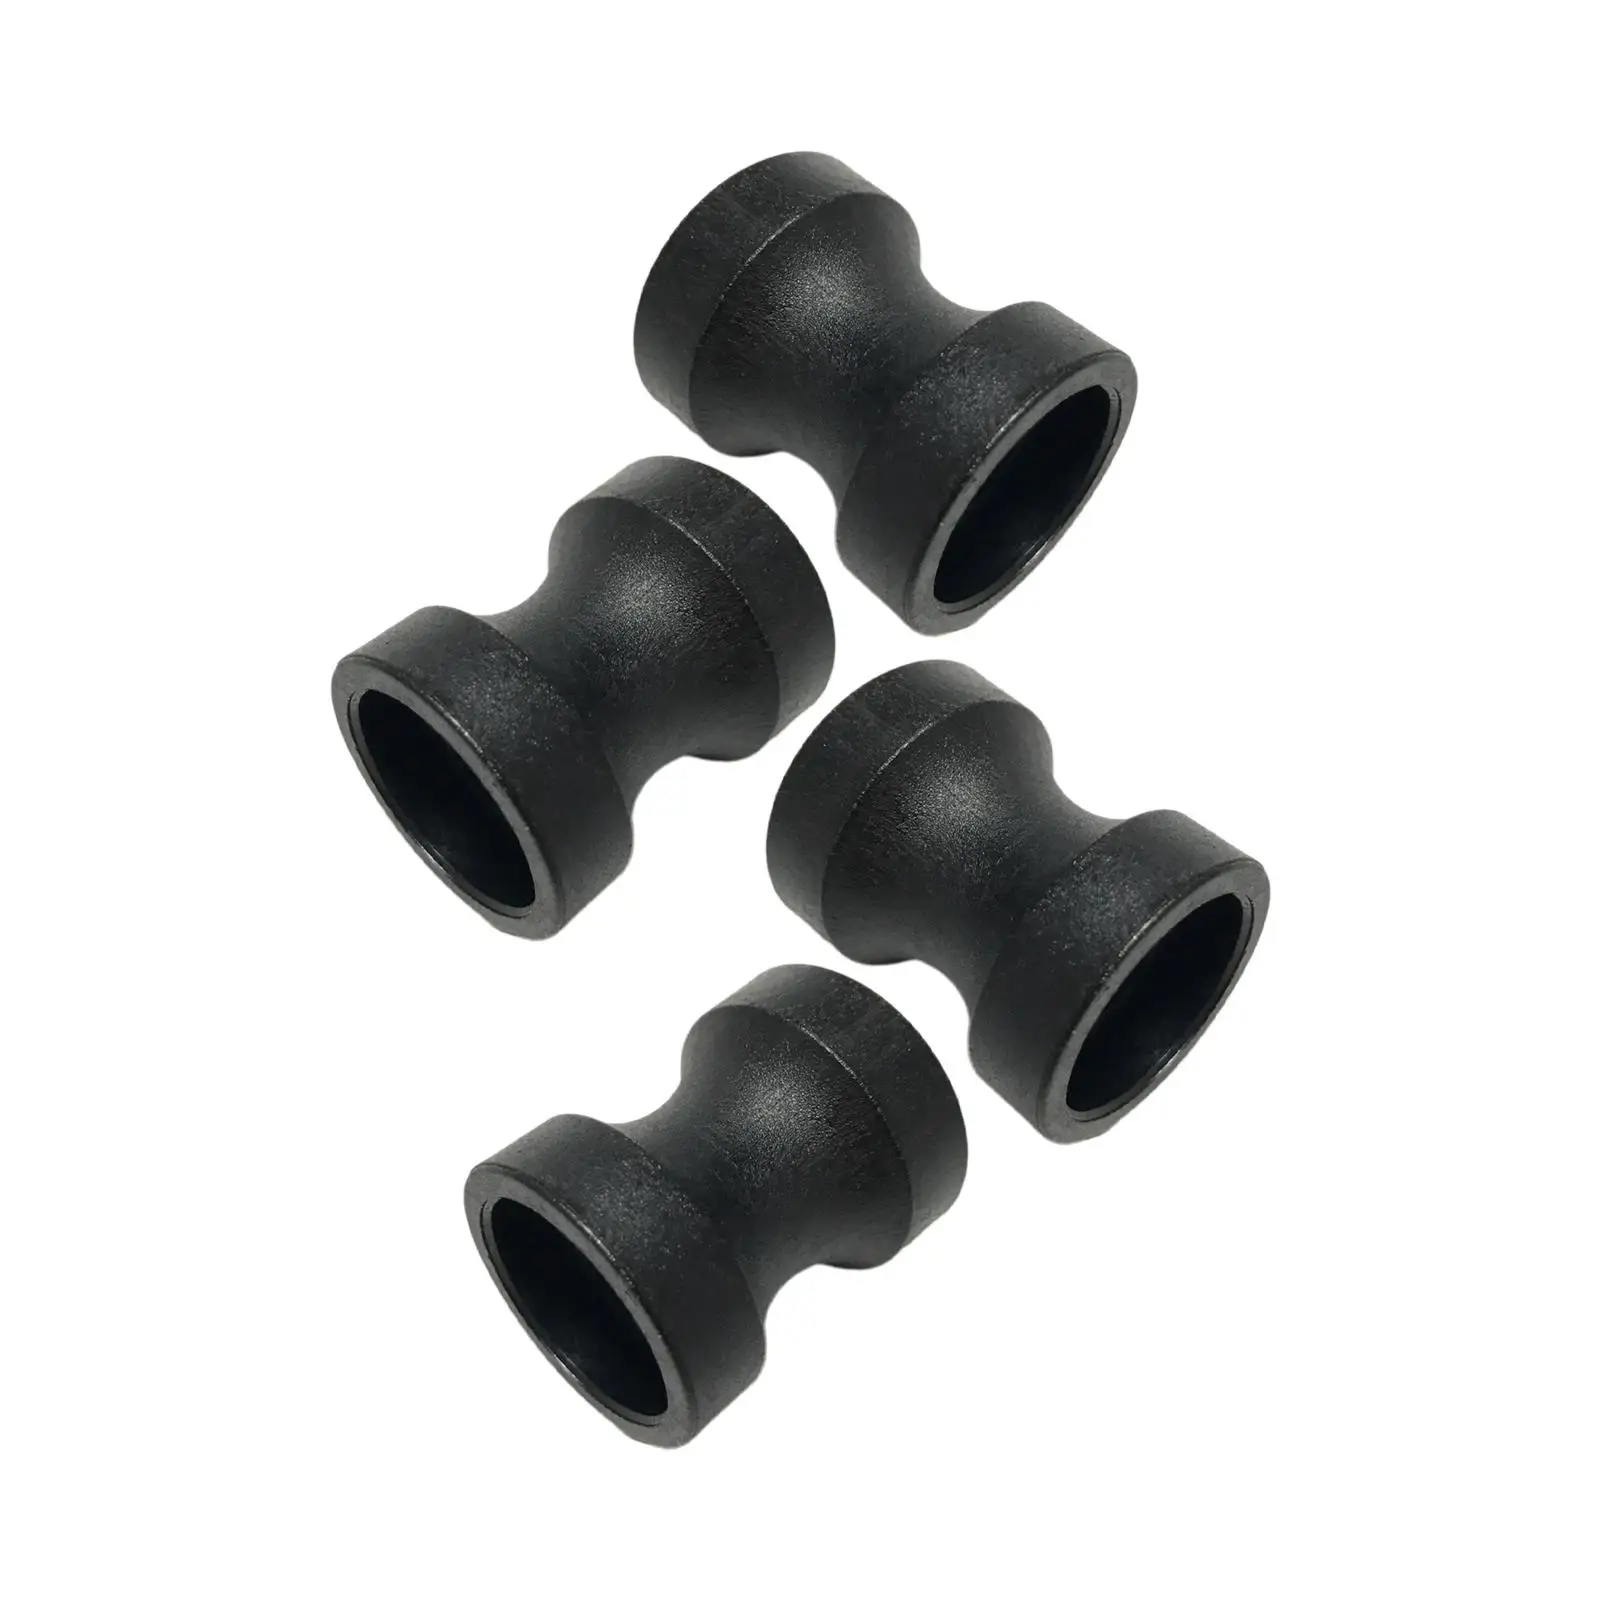 

4x Universal Pulley Rowing Machine Roller Replace Smooth Weight Attachments Rowing Machine Bearing Wheel for Gym Home Equipment